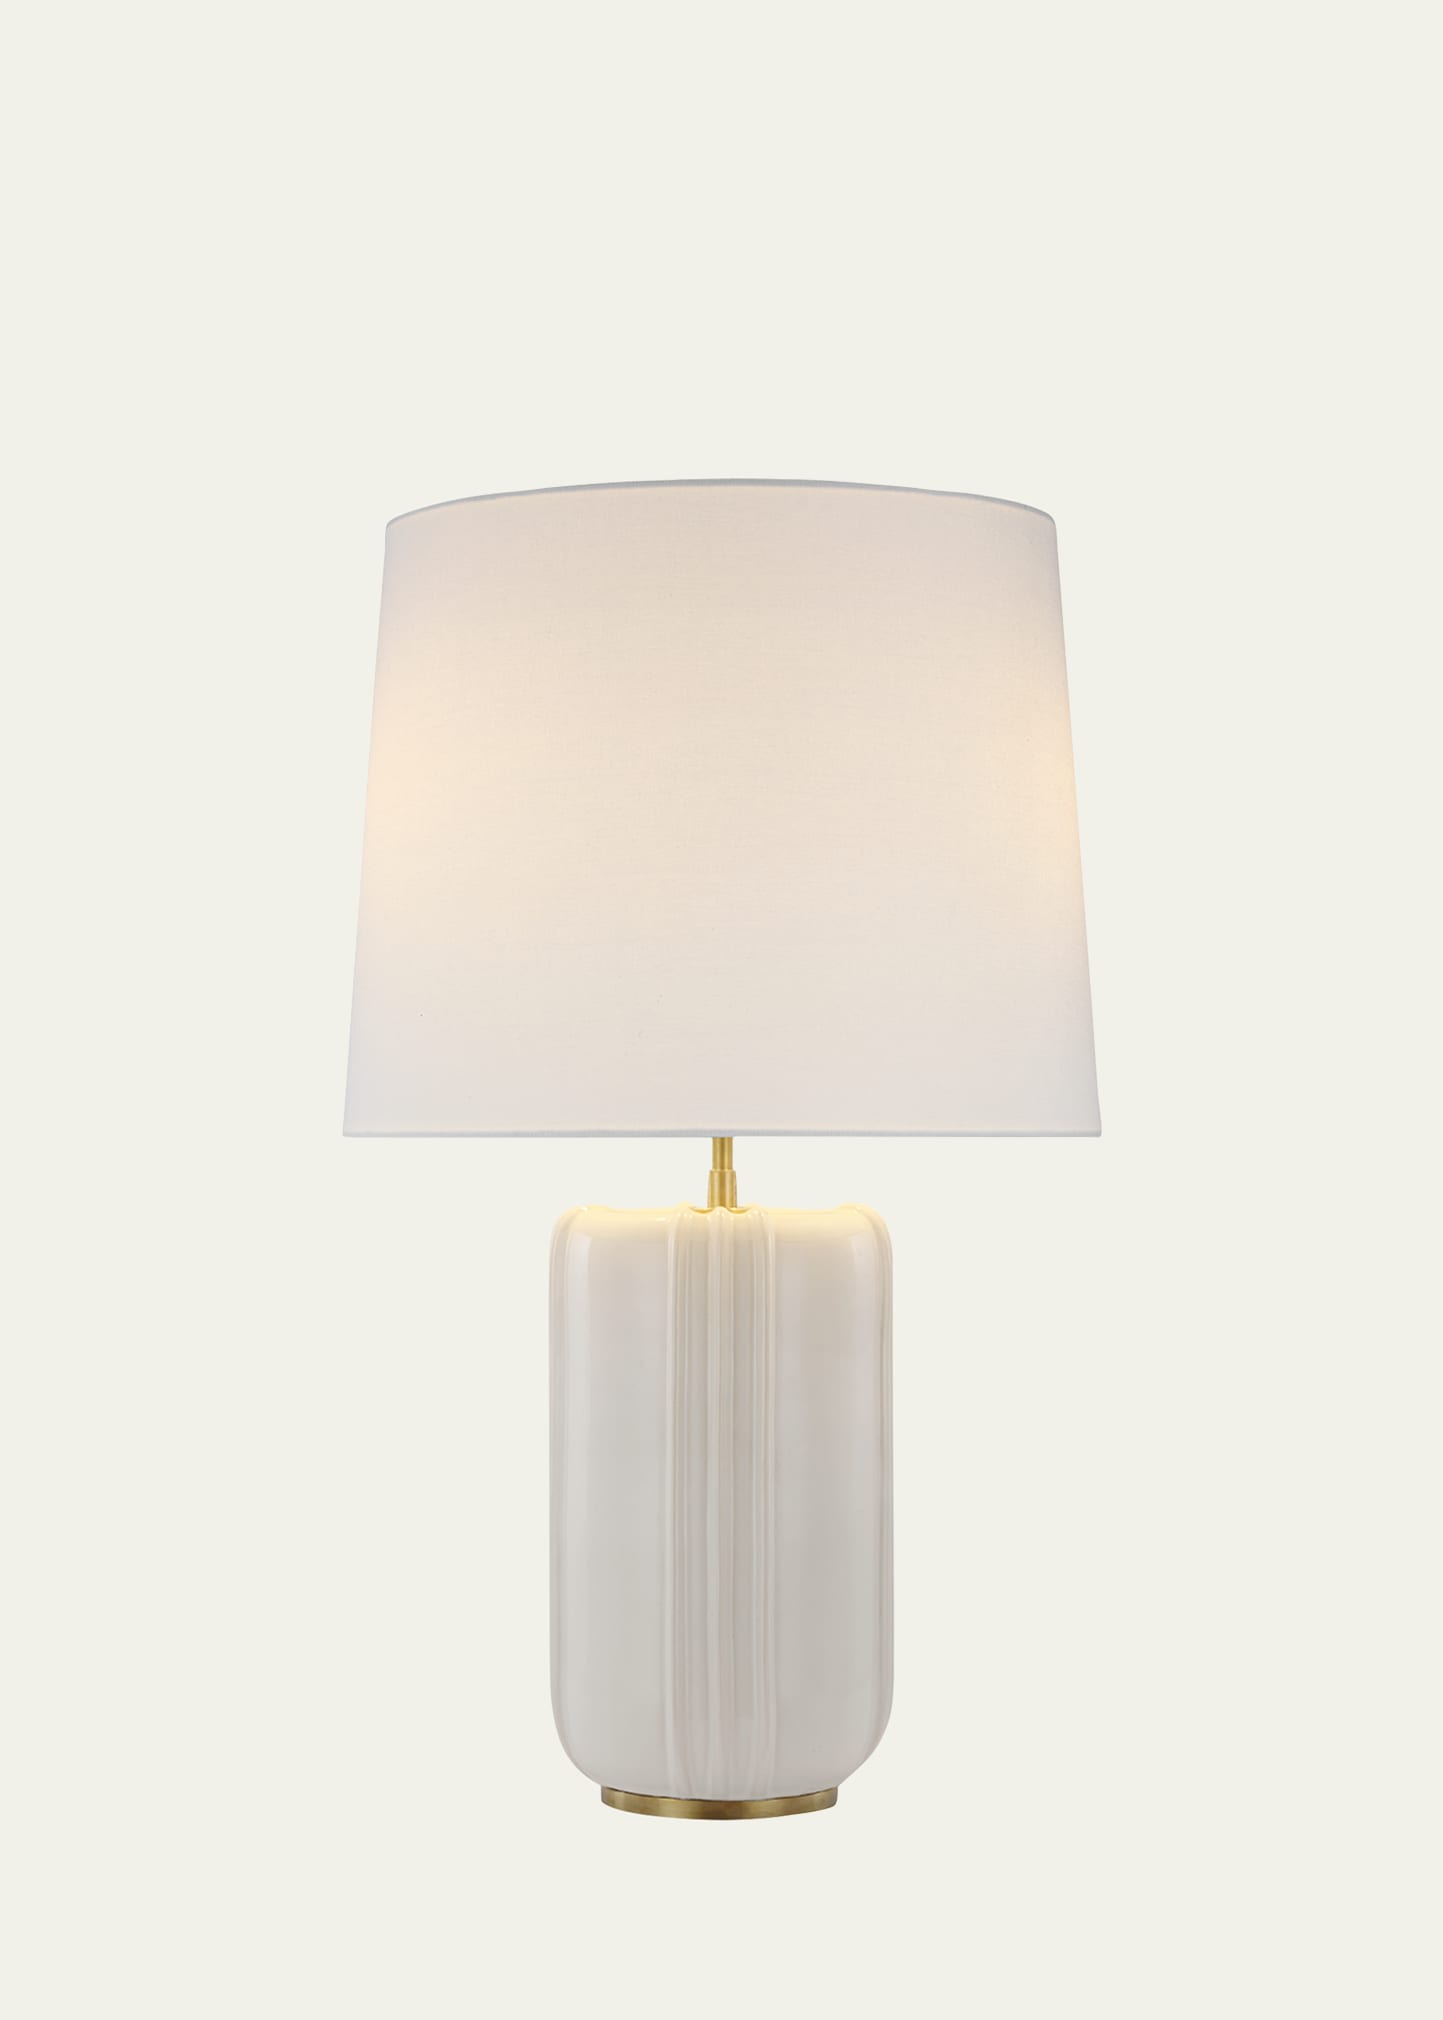 Thomas O'brien For Visual Comfort Signature Minx Large Table Lamp In Beige